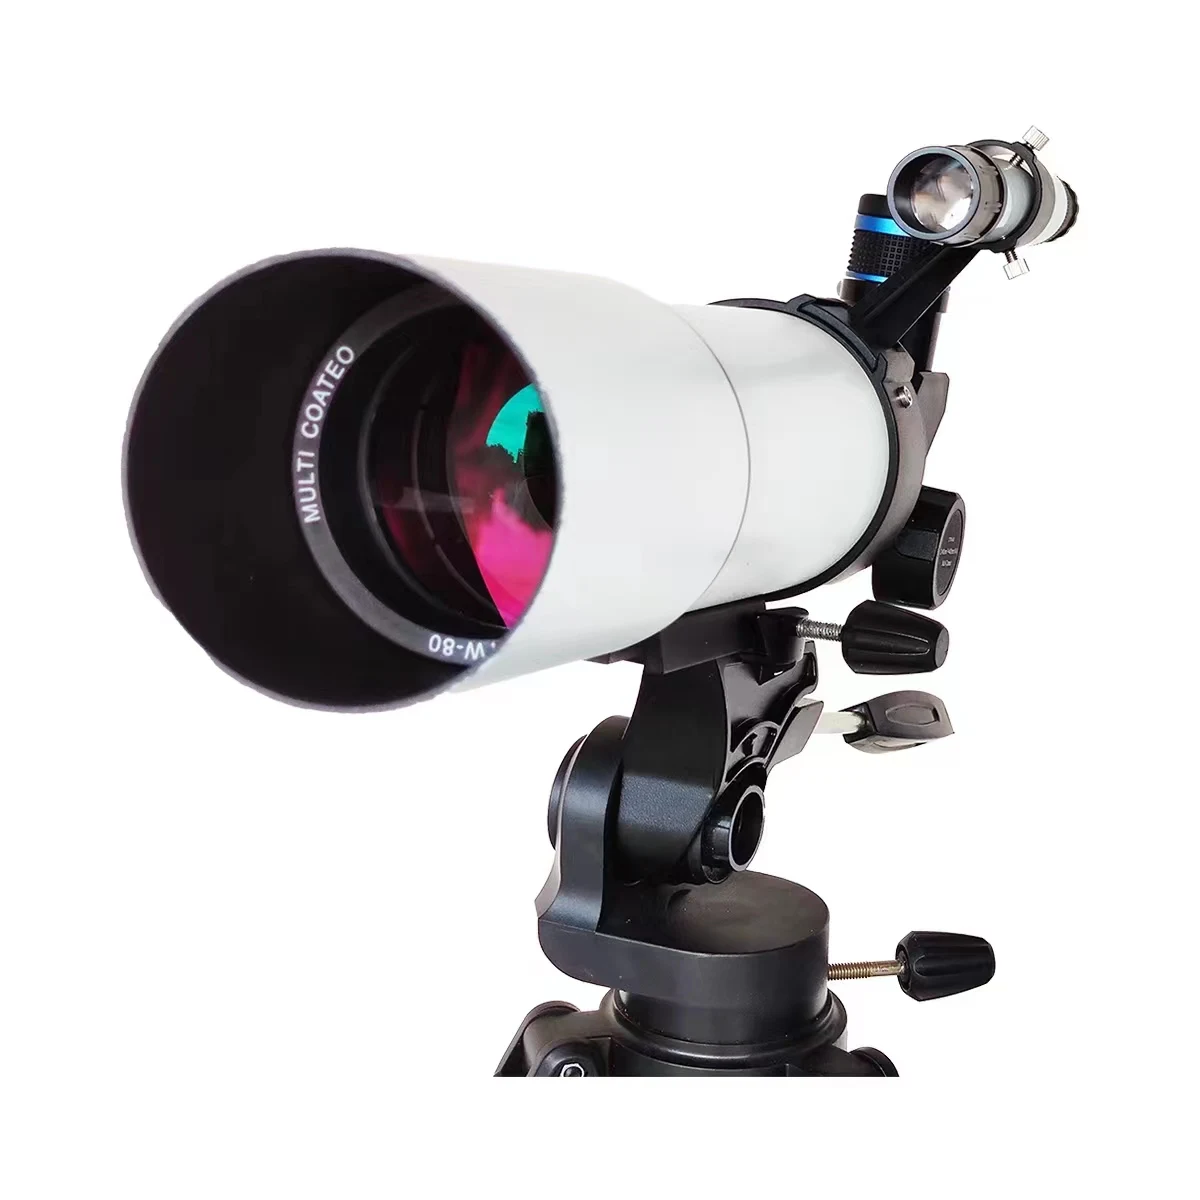 

SUNCORE Astronomical Telescope Refractor 80500 Low Price Astronomy Telescope For Sale To View Moon And Planet